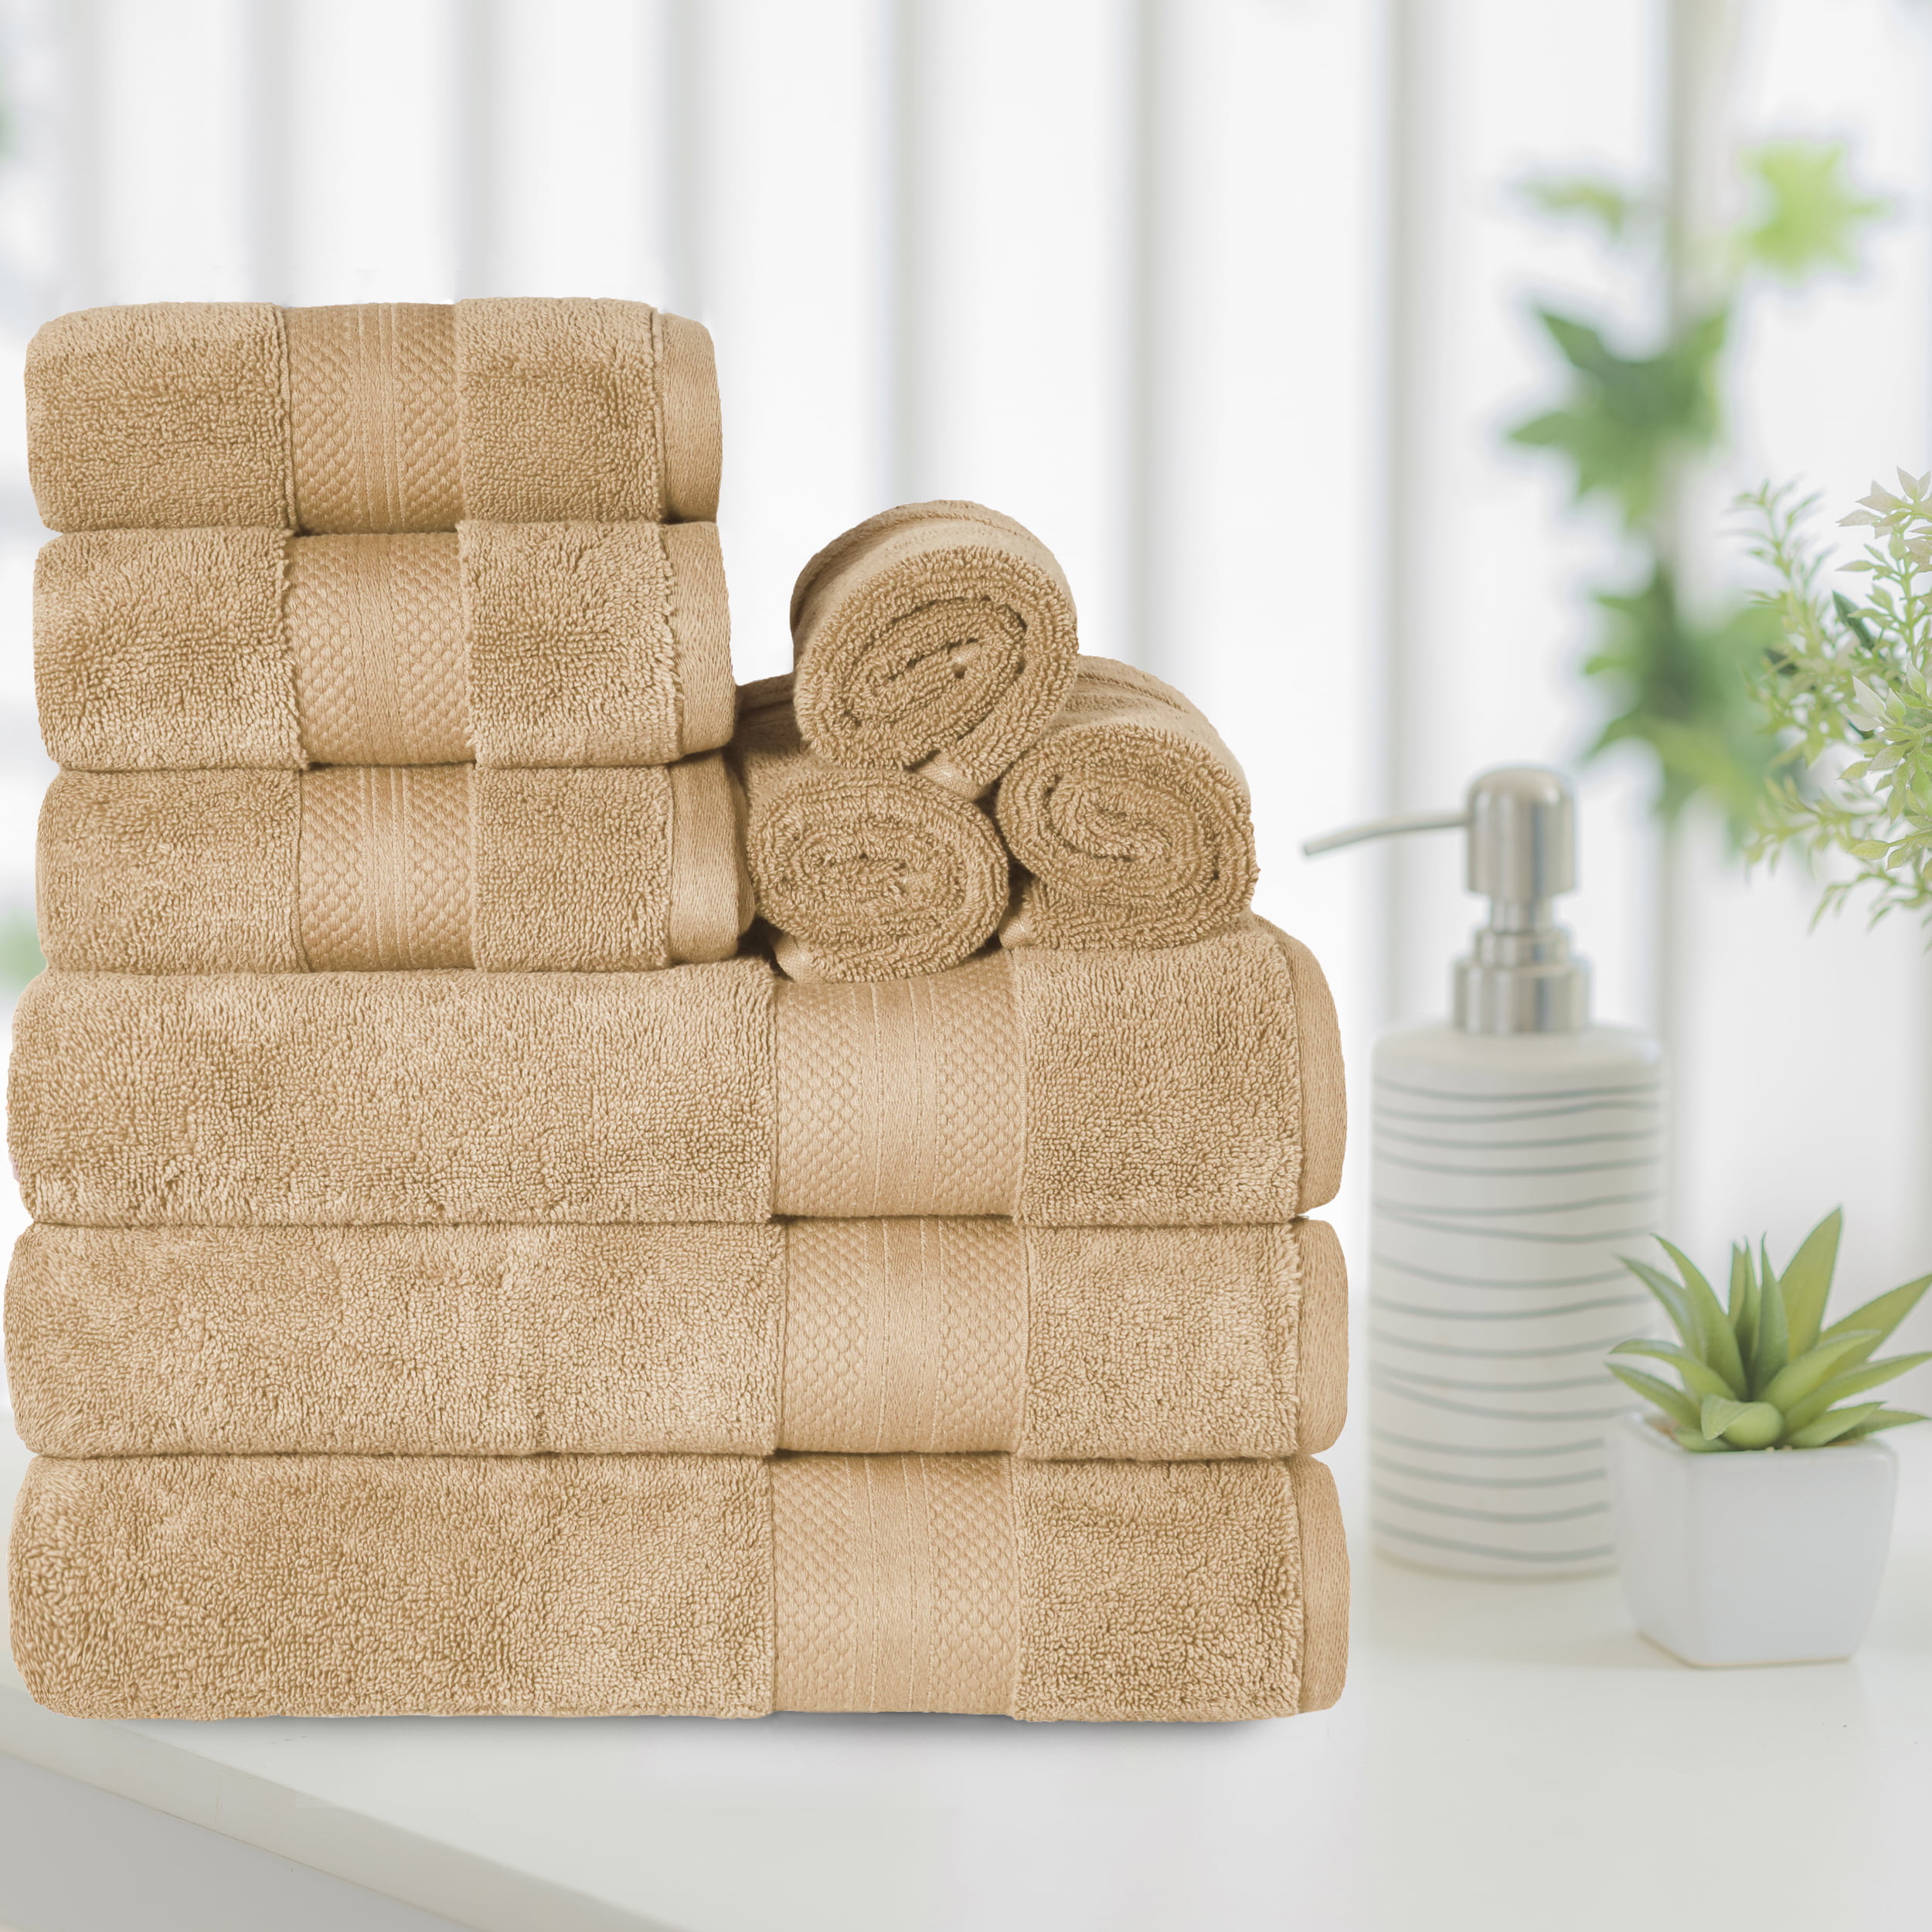 Plush Turkish Cotton Diamond Bath Towels & Gift Sets . – Fitted Home